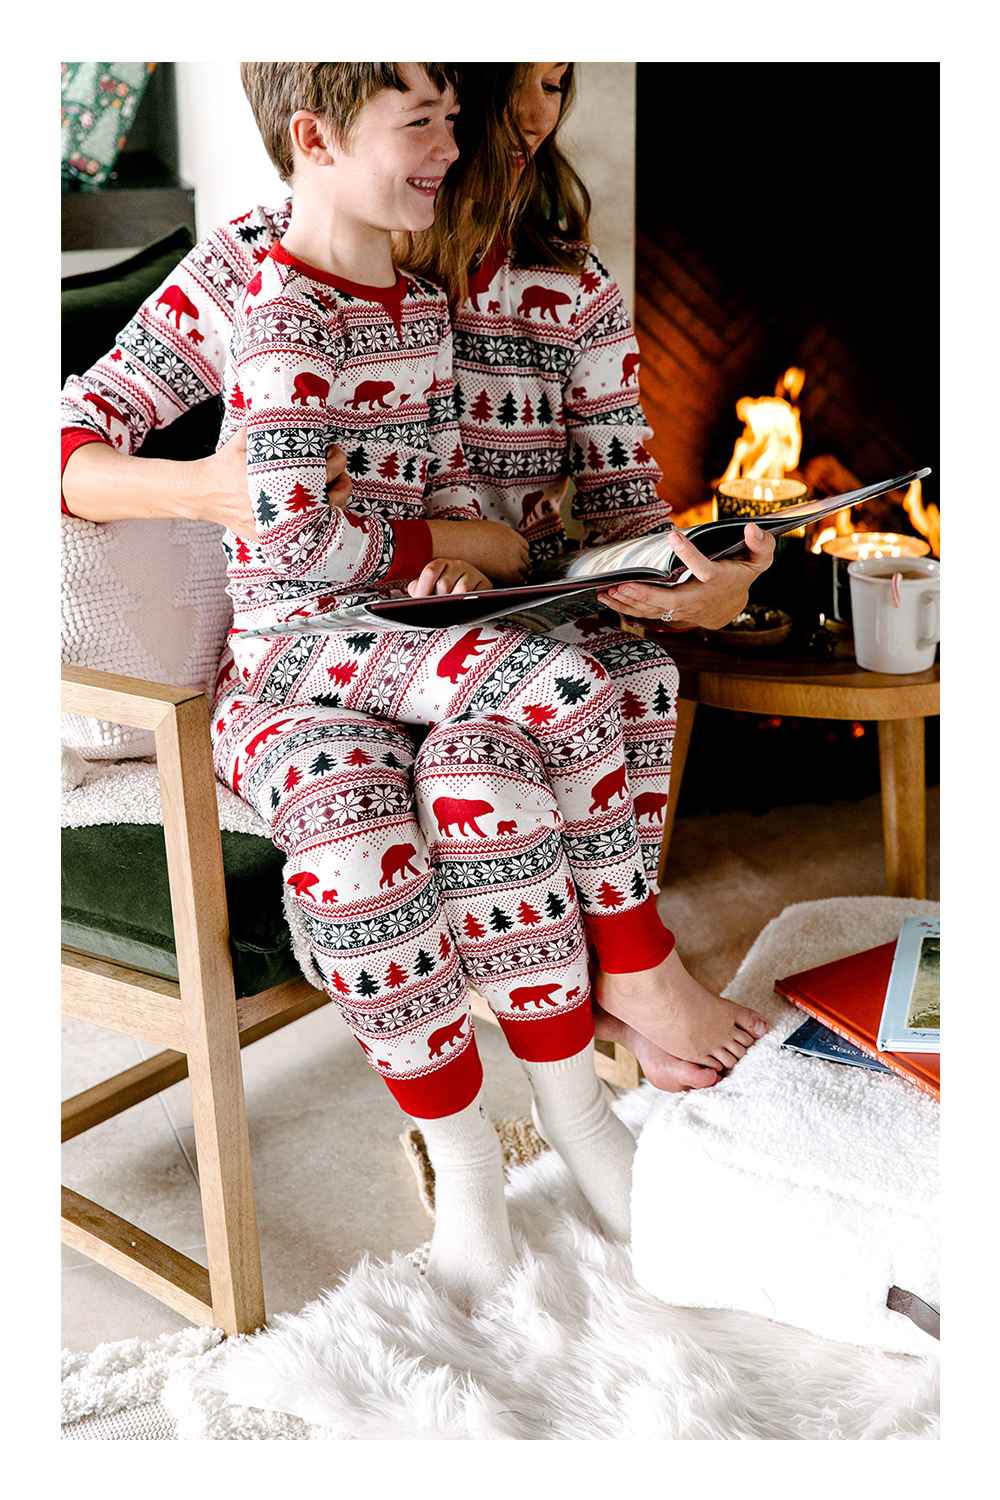 Holiday Plaid Flannel Matching Family Pajamas Collection - Wondershop™ White, Holiday Plaid Flannel Matching Family Pajamas Collection - Wondershop™ Red, Holiday Fair Isle Matching Family Pajama Collection - Wondershop™, Holiday Buffalo Check Flannel Matching Family Pajamas Collection - Wondershop™ White, Holiday Gnomes Matching Family Pajamas Collection - Wondershop™ Navy, Oblong Embroidered Tree Decorative Throw Pillow Stucco - Threshold™, Faux Fur Sheepskin Throw Blanket Cream - Threshold™, Buckland Live Edge Coffee Table Brown - Threshold™, Higgins Sling Arm Chair Olive Velvet - Threshold™, Sherpa Pouf Cream - Room Essentials™, 19oz Large Mercury Jar Candle Holiday Balsam Green - Threshold™, 15oz Lidded Glass Jar 3-Wick Electroplated Tranquil Spruce and Mint Candle - Opalhouse™, 14oz 4pk Porcelain Woodbridge Mugs White - Threshold™, Natural Unsweetened Cocoa Powder - 8oz - Good & Gather™, The Velveteen Rabbit - by  Margery Williams (Hardcover), Natural Unsweetened Cocoa Powder - 8oz - Good & Gather™